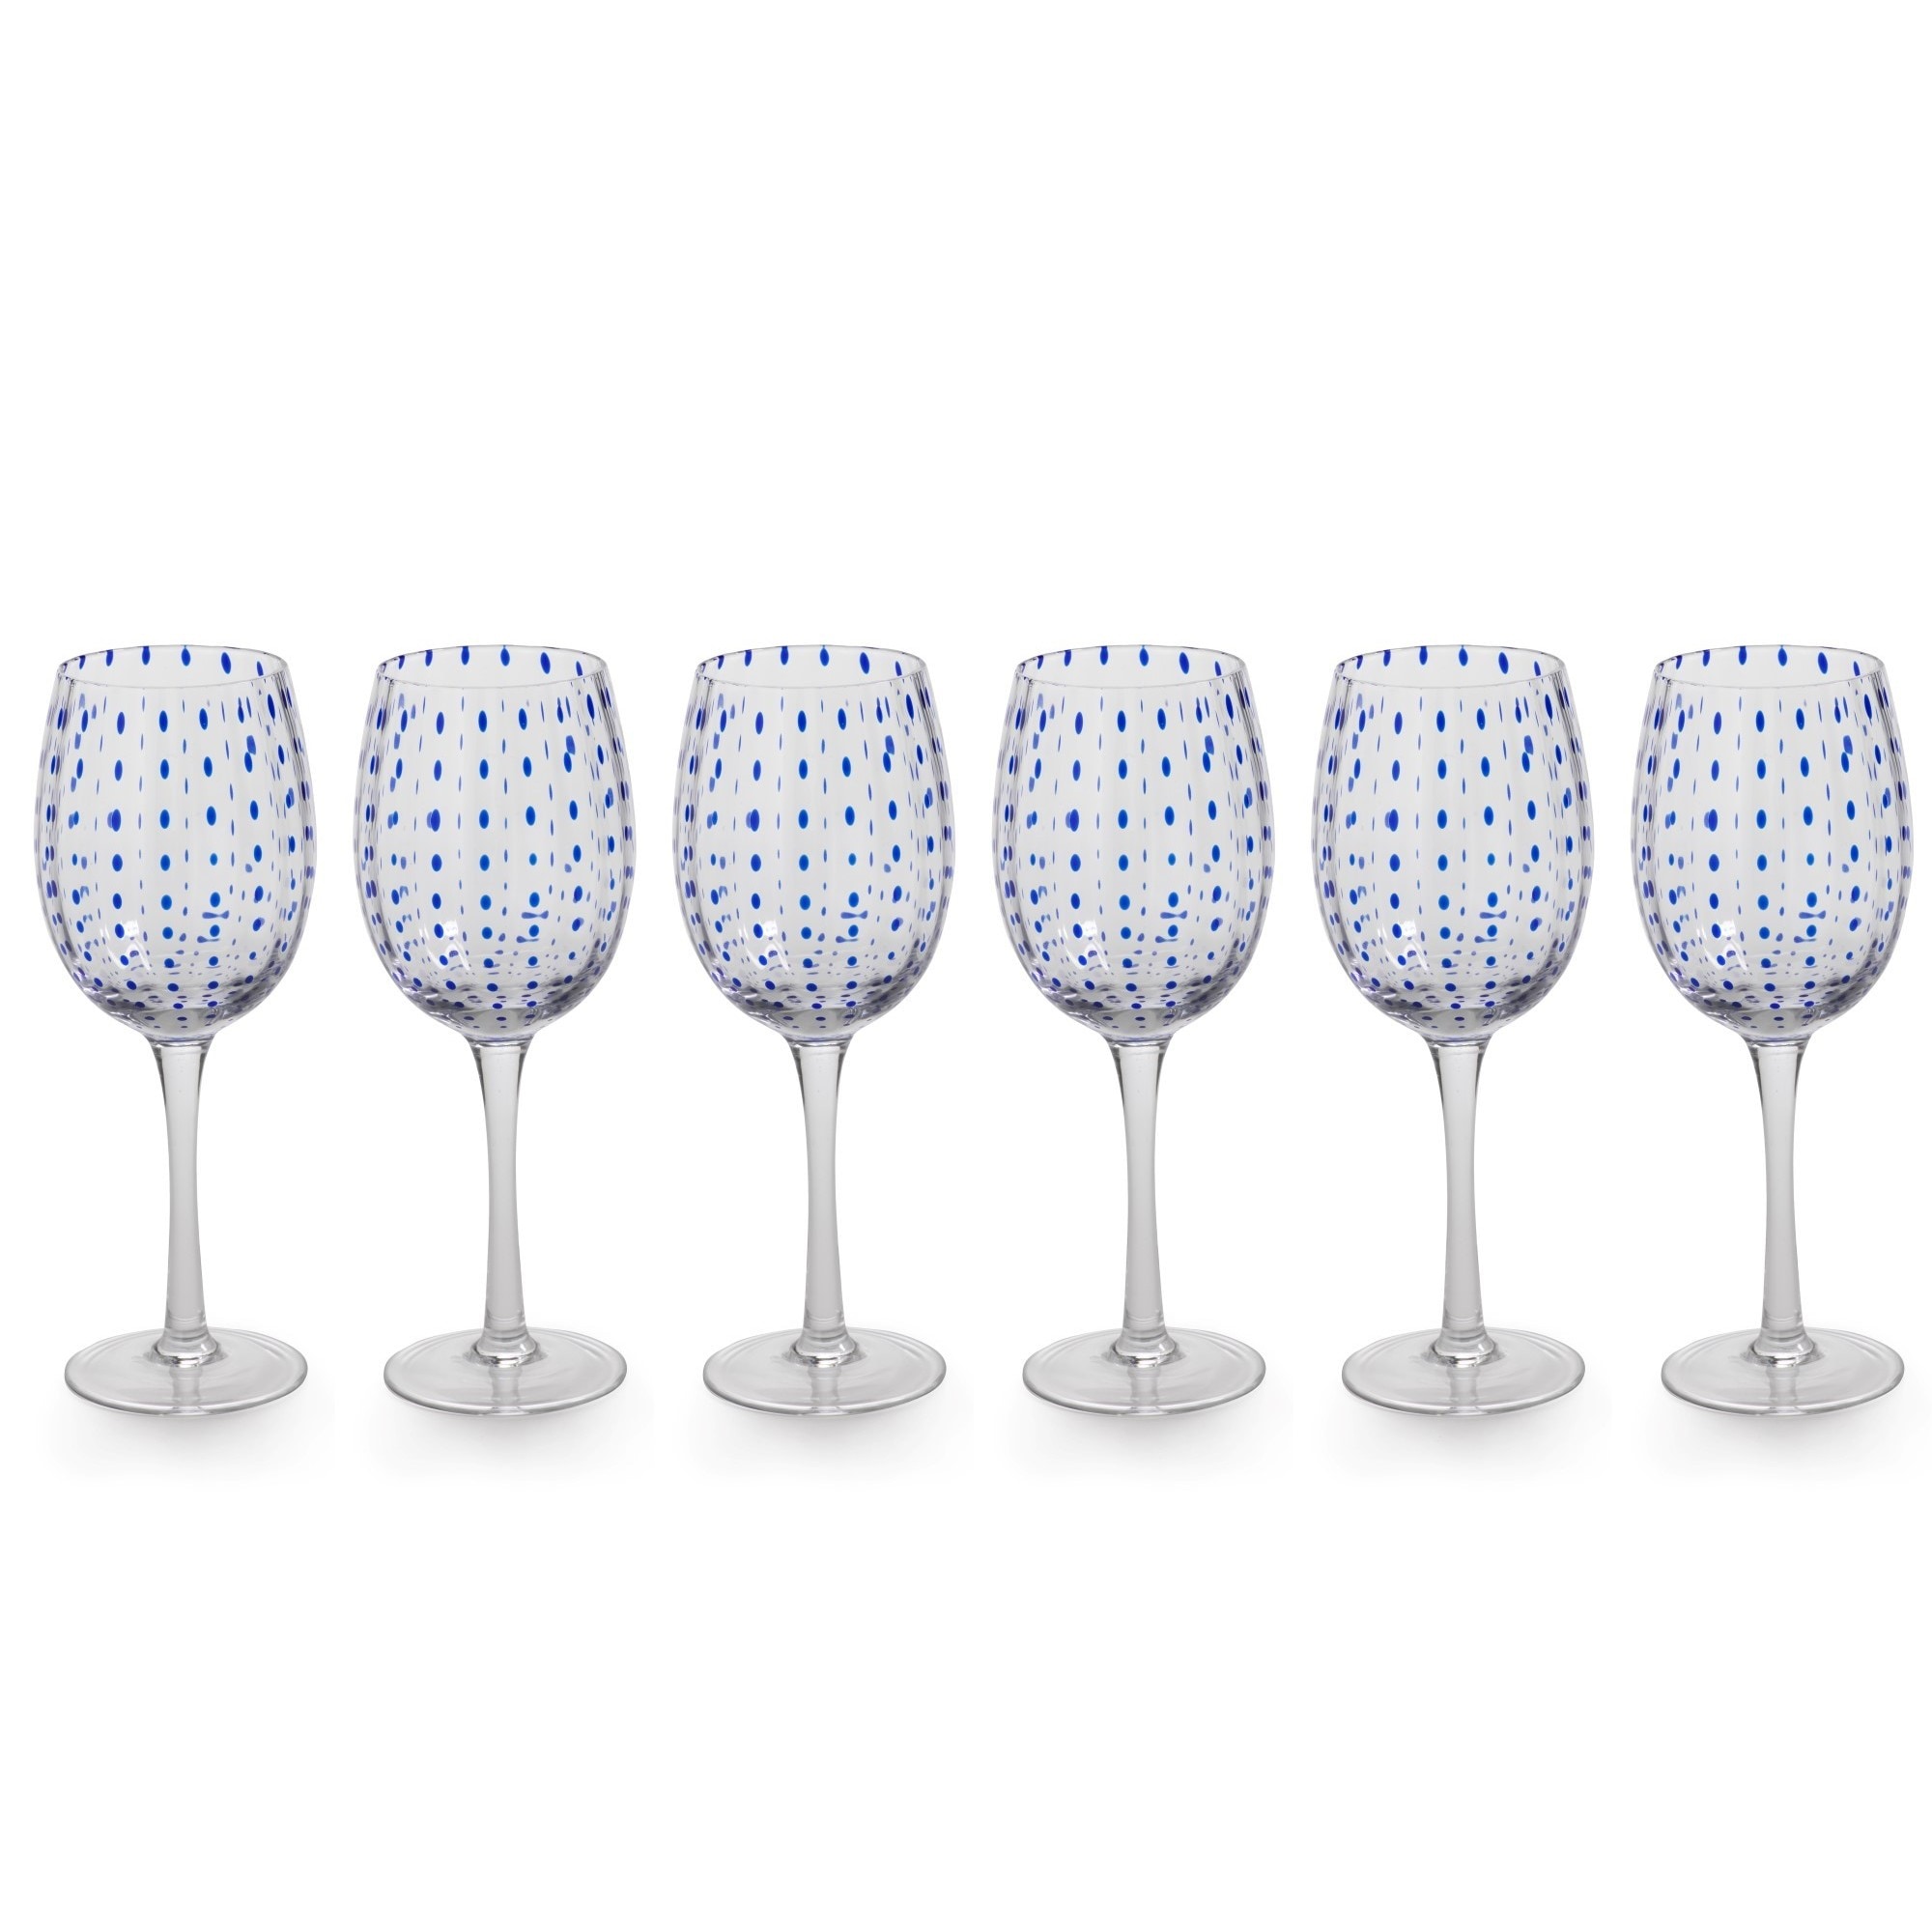 Zodax 8.5-Inch Tall Fintan Wine Goblets - Set of 6